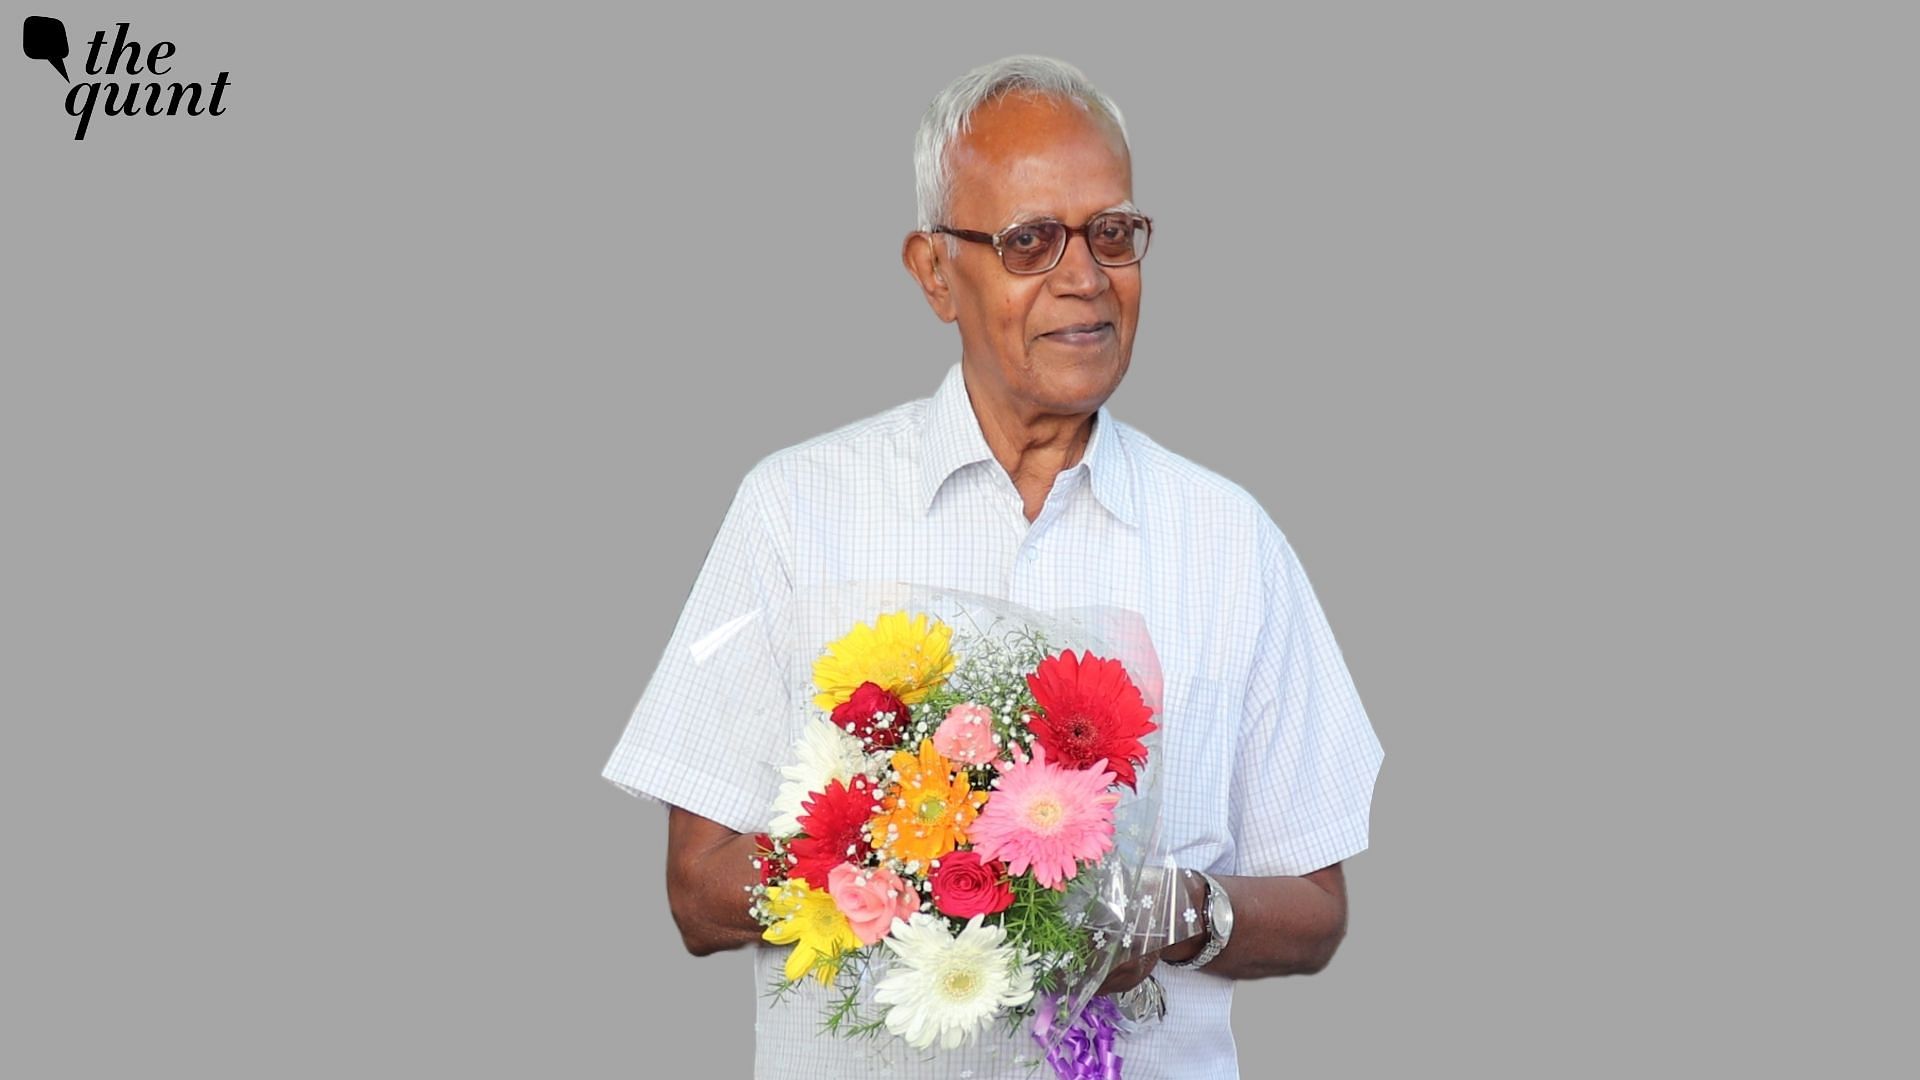 <div class="paragraphs"><p>On Monday, 5 July, human rights activist Father Stan Swamy, who was incarcerated in connection with the Elgar Parishad case, <a href="https://www.thequint.com/news/india/father-stan-swamy-dies-elgar-parishad-bhima-koregaon-case#read-more">passed away</a> as a pre-trial prisoner after suffering a cardiac arrest.</p></div>